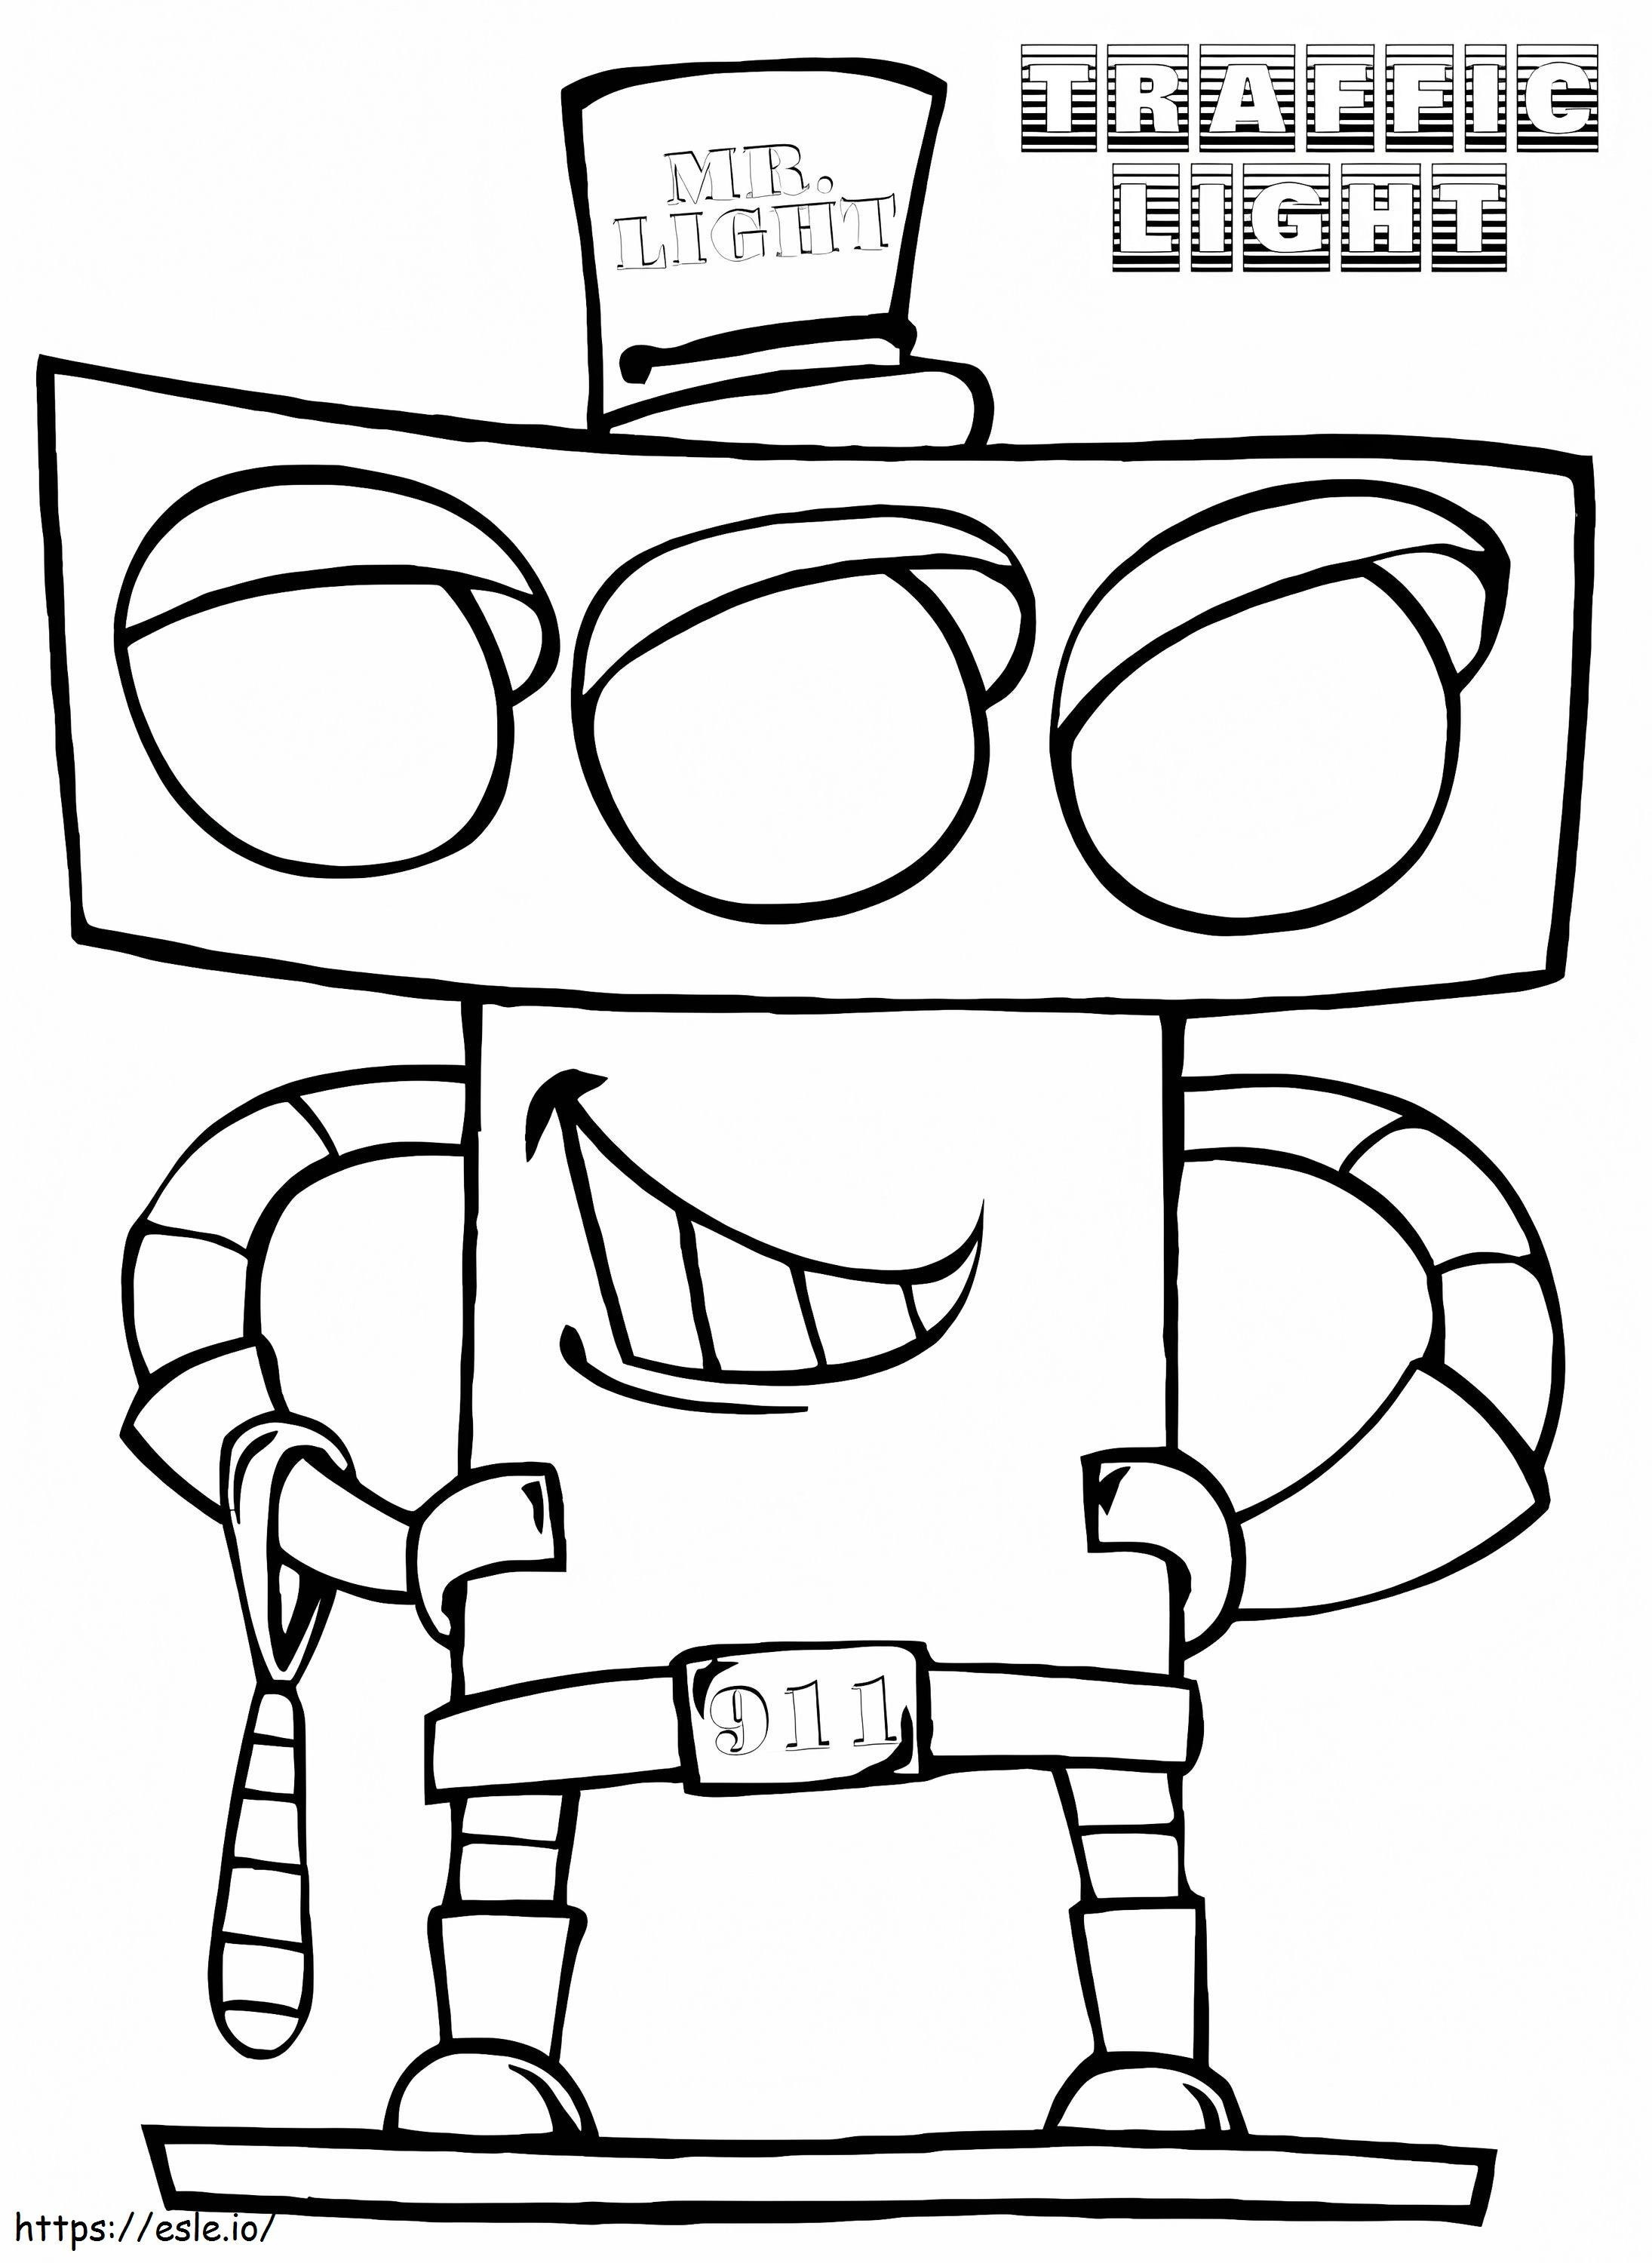 Mr. Traffic Light coloring page